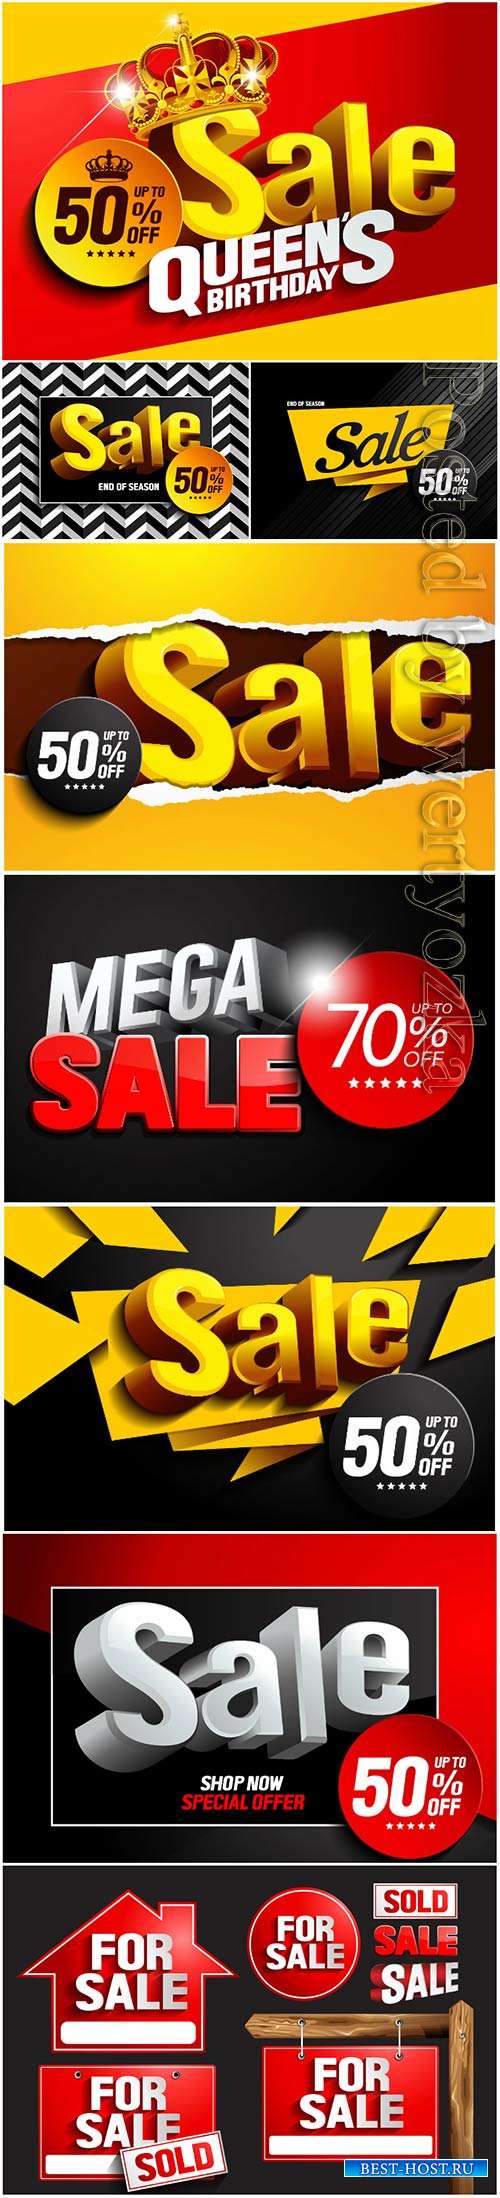 Sale with discount vector design